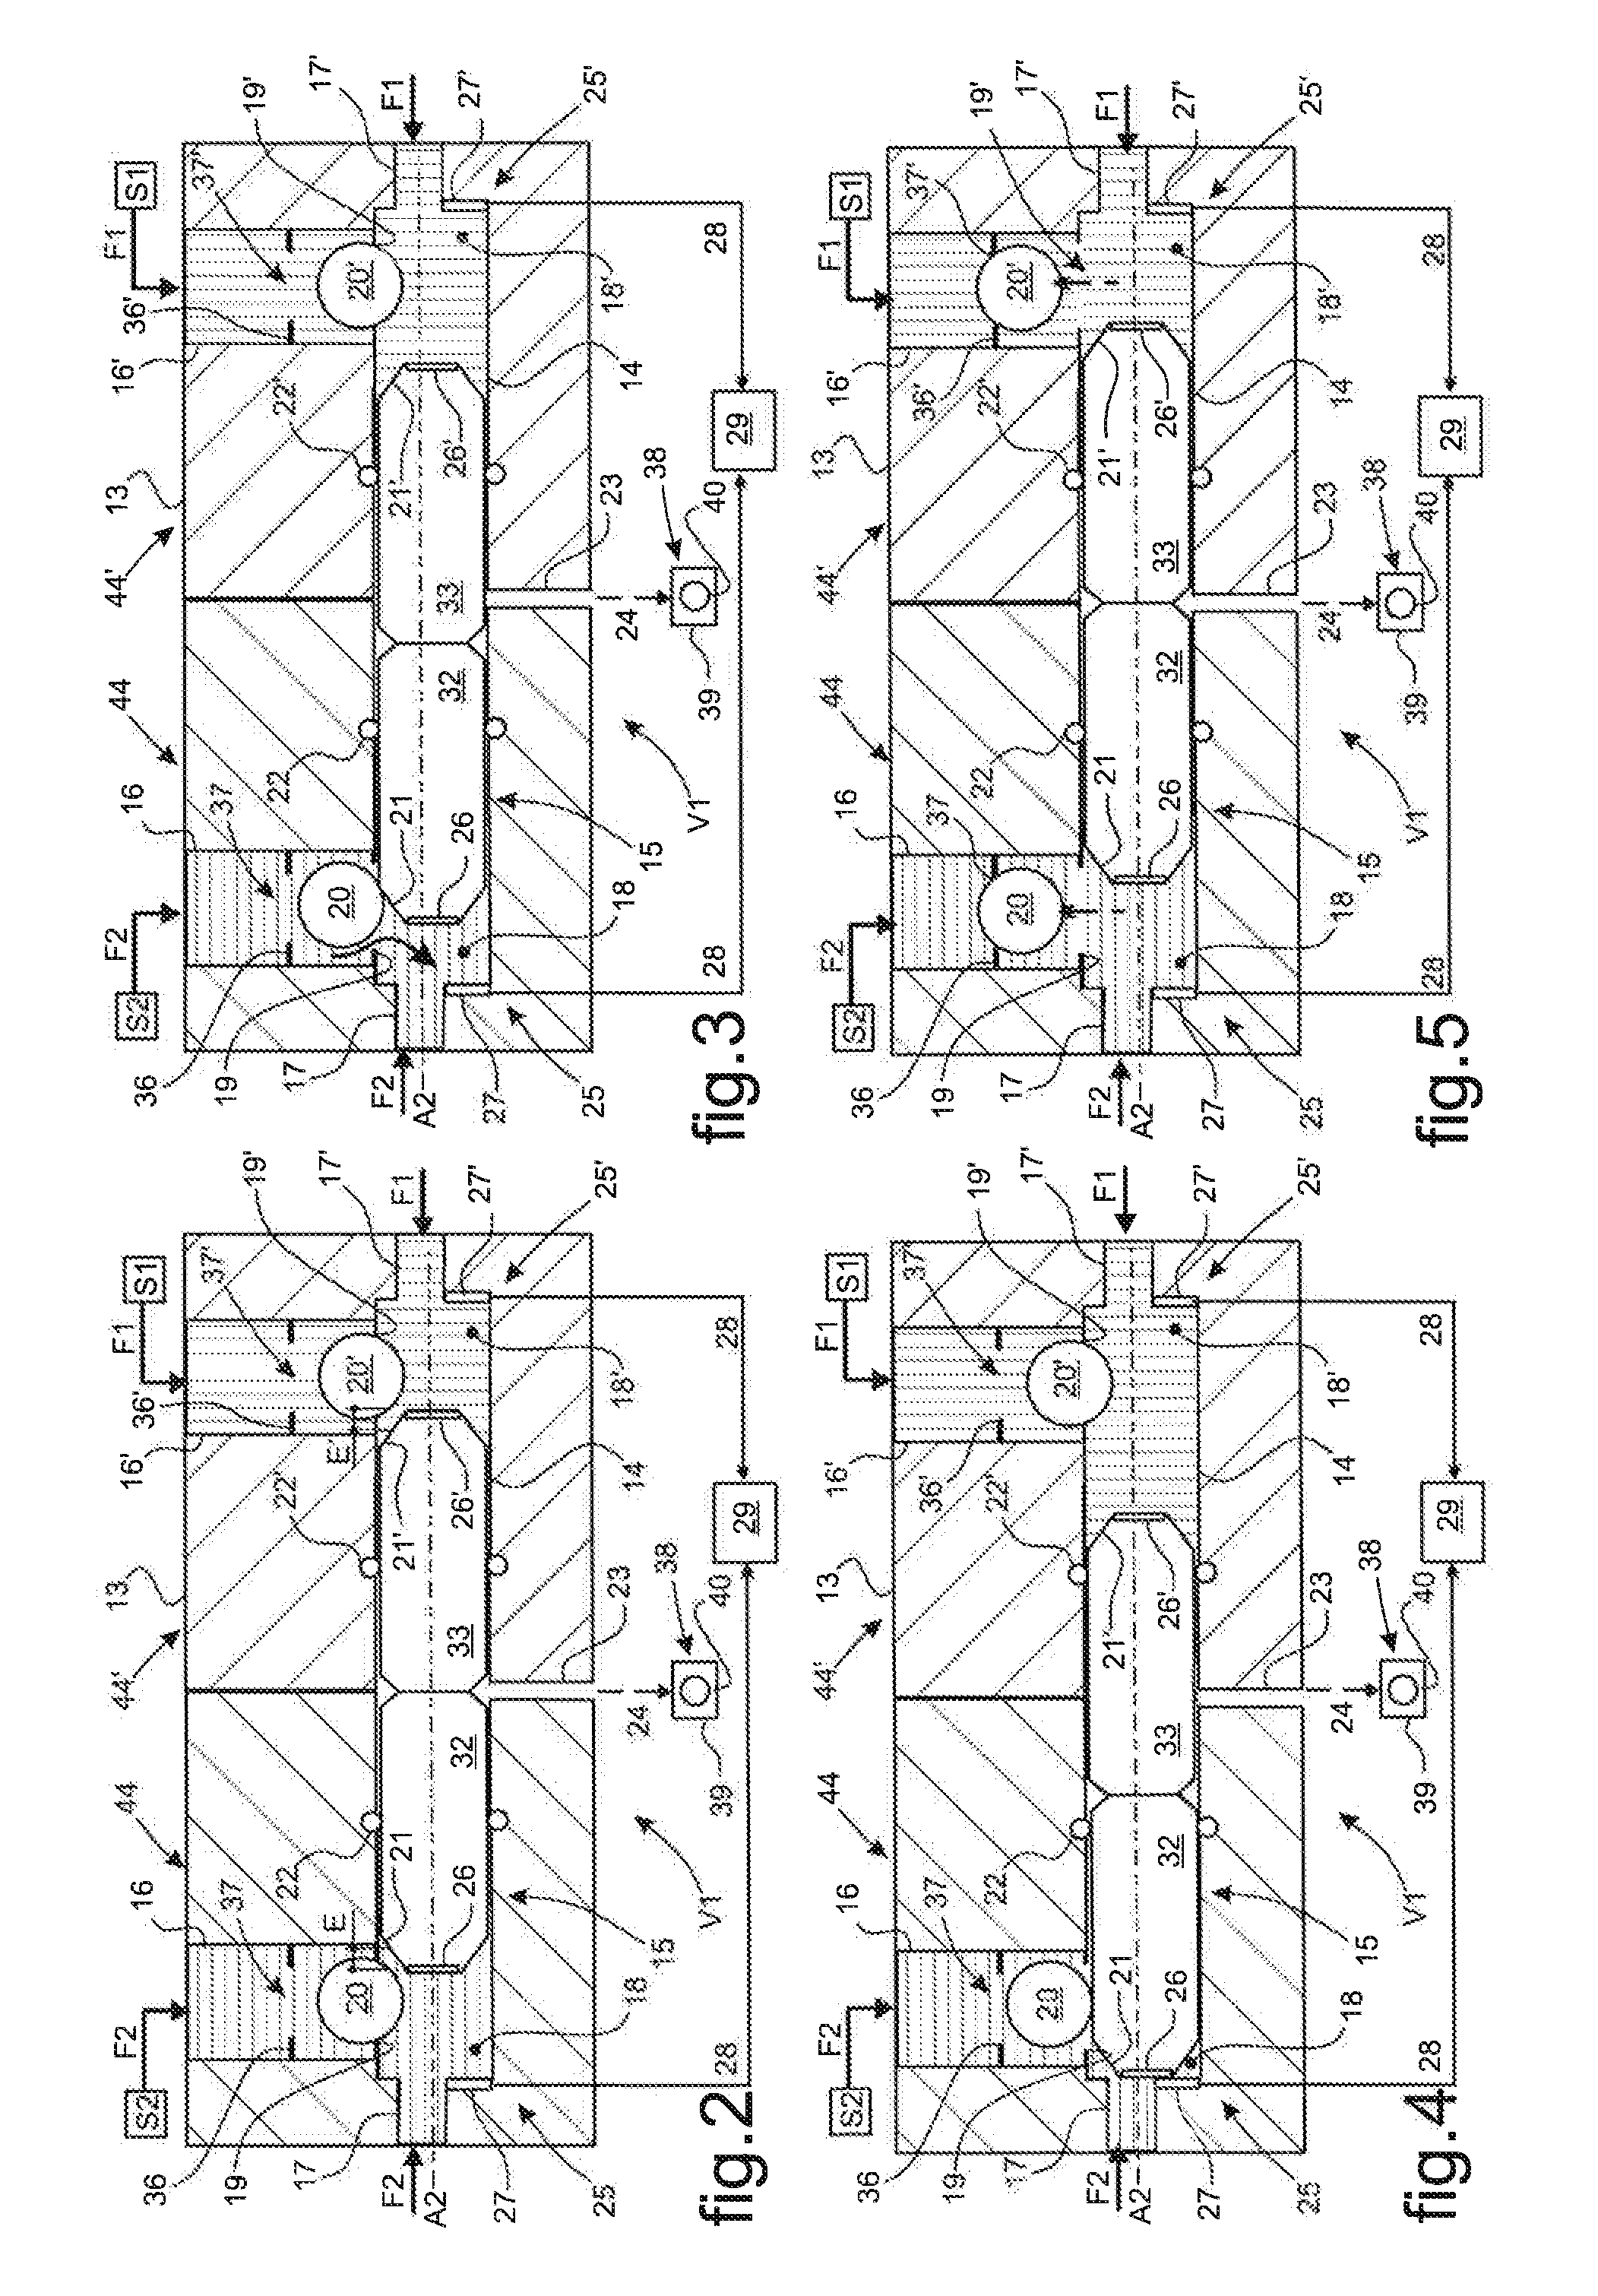 Pressure-balance valve for balancing fluid feed to actuator cylinders of a servo-control for controlling rotor blades of a rotorcraft